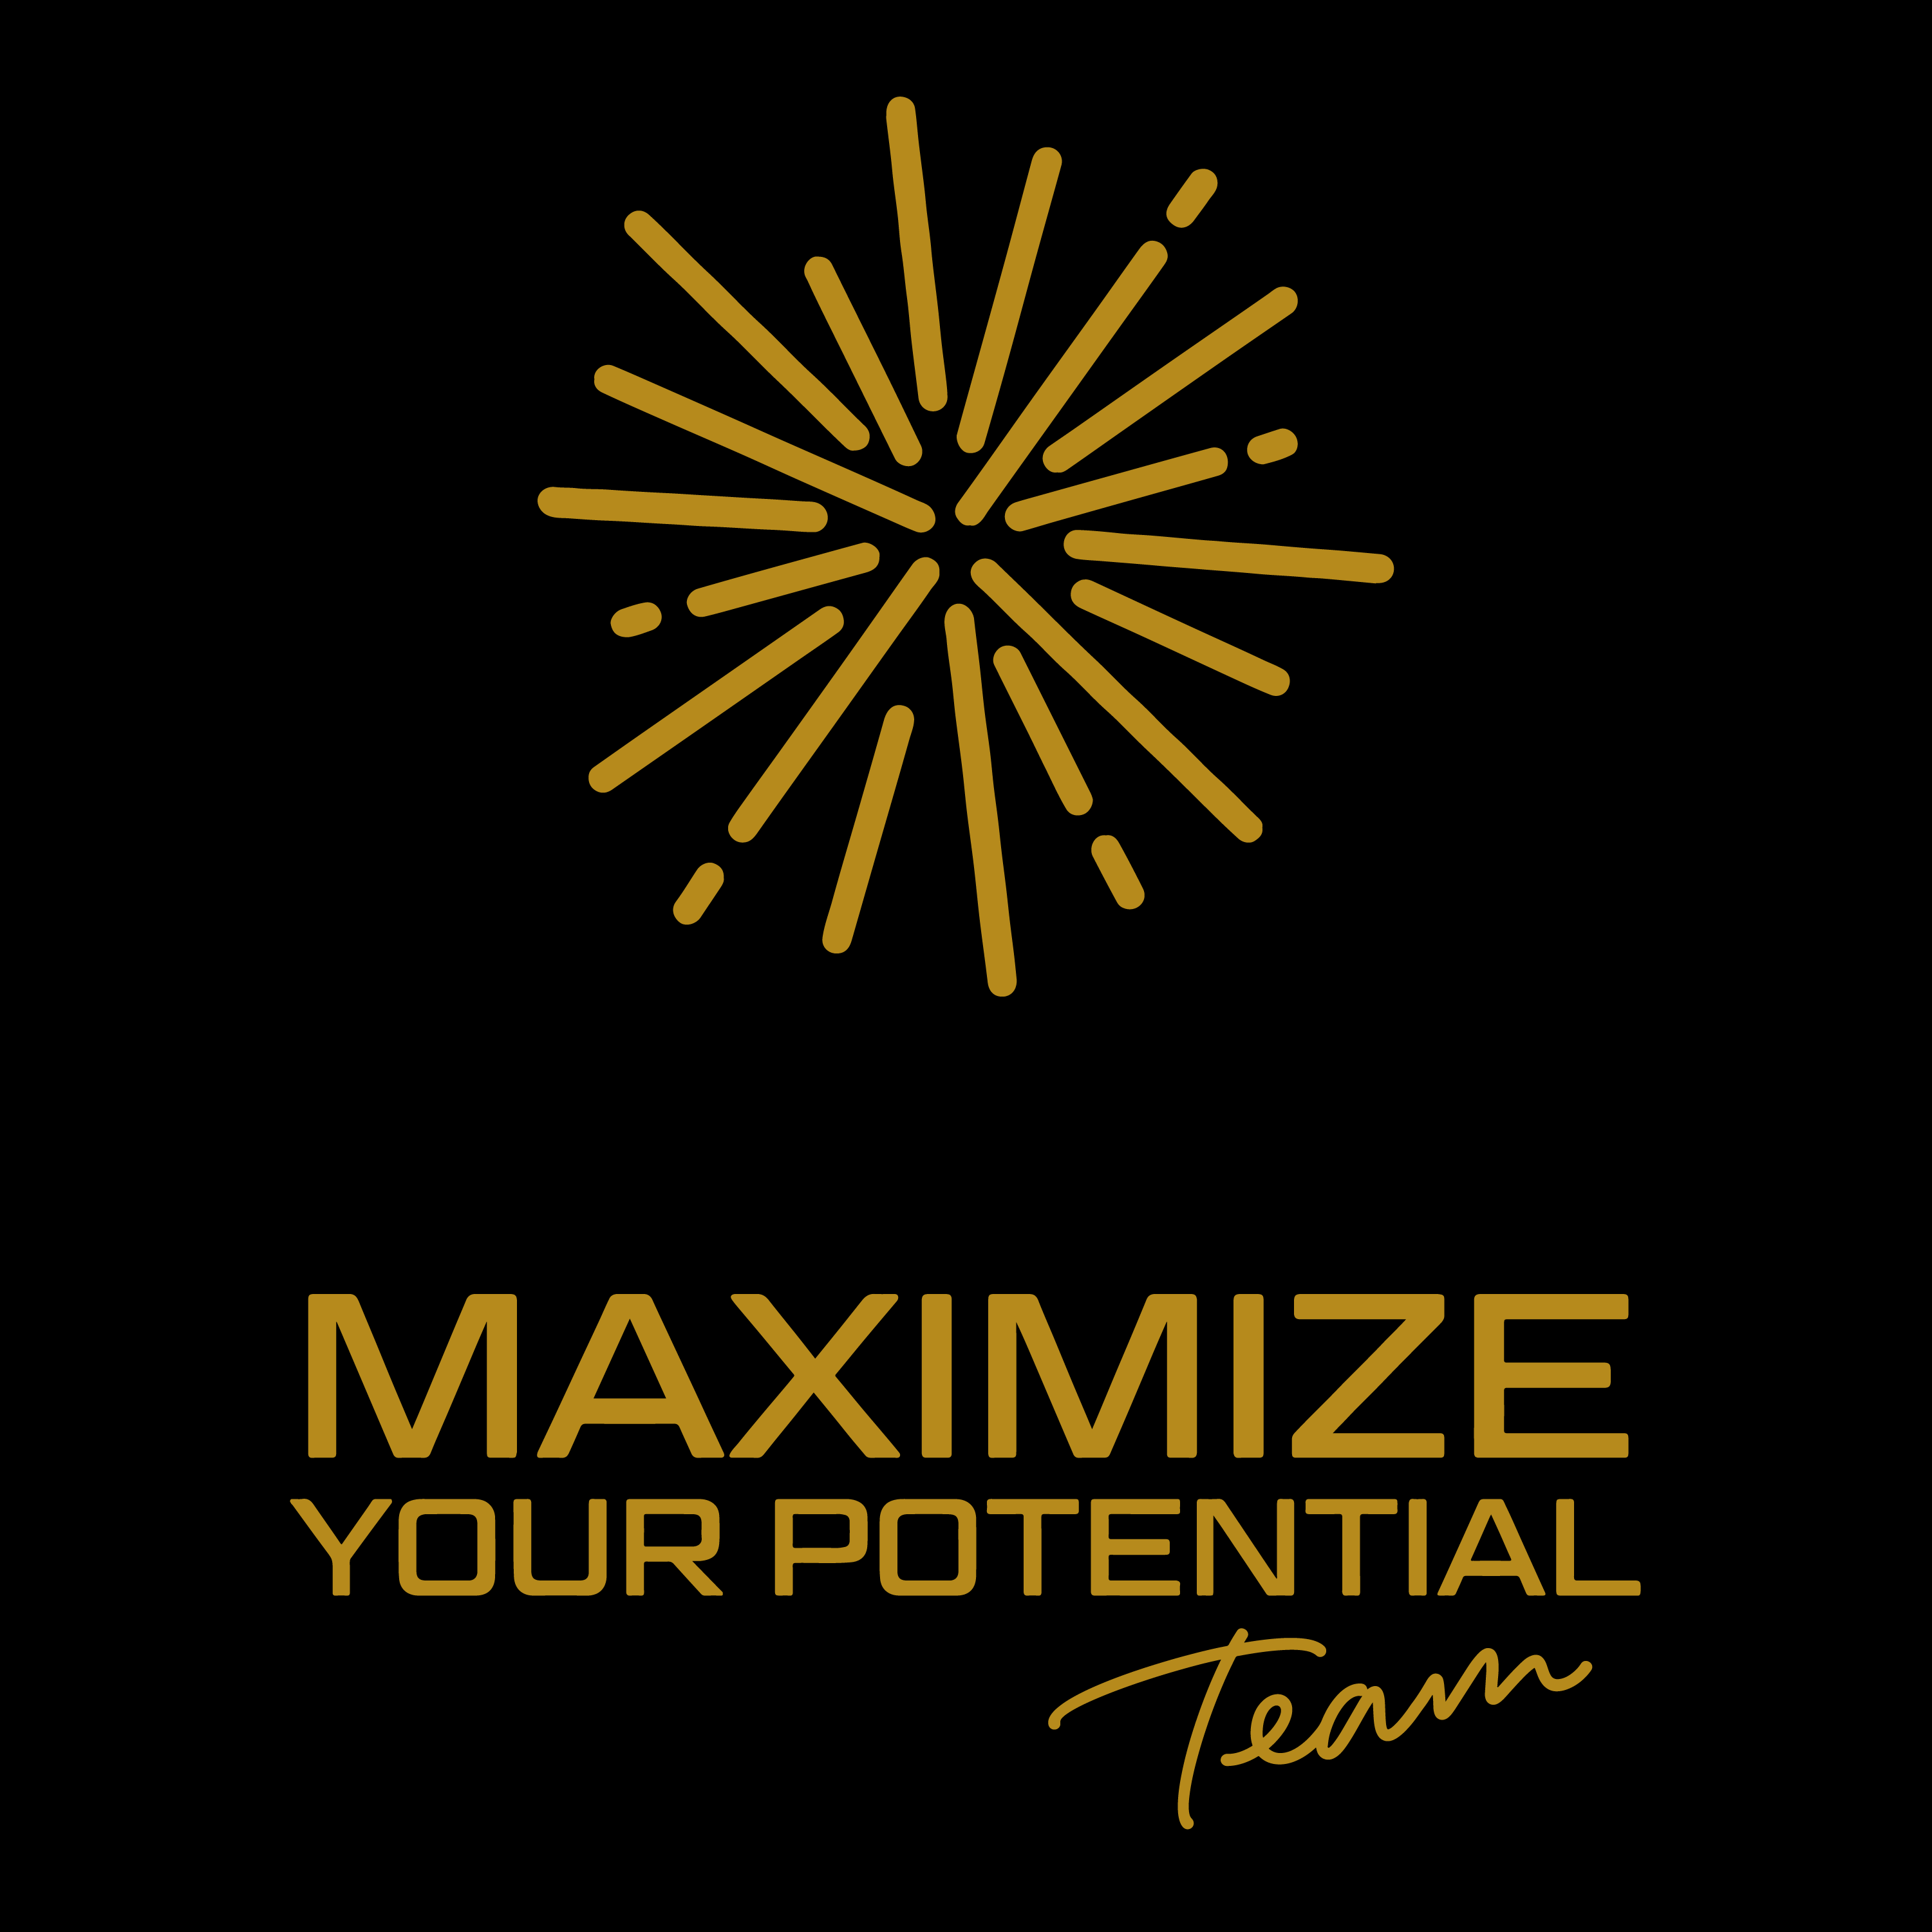 Club Image for MAXIMIZE YOUR POTENTIAL